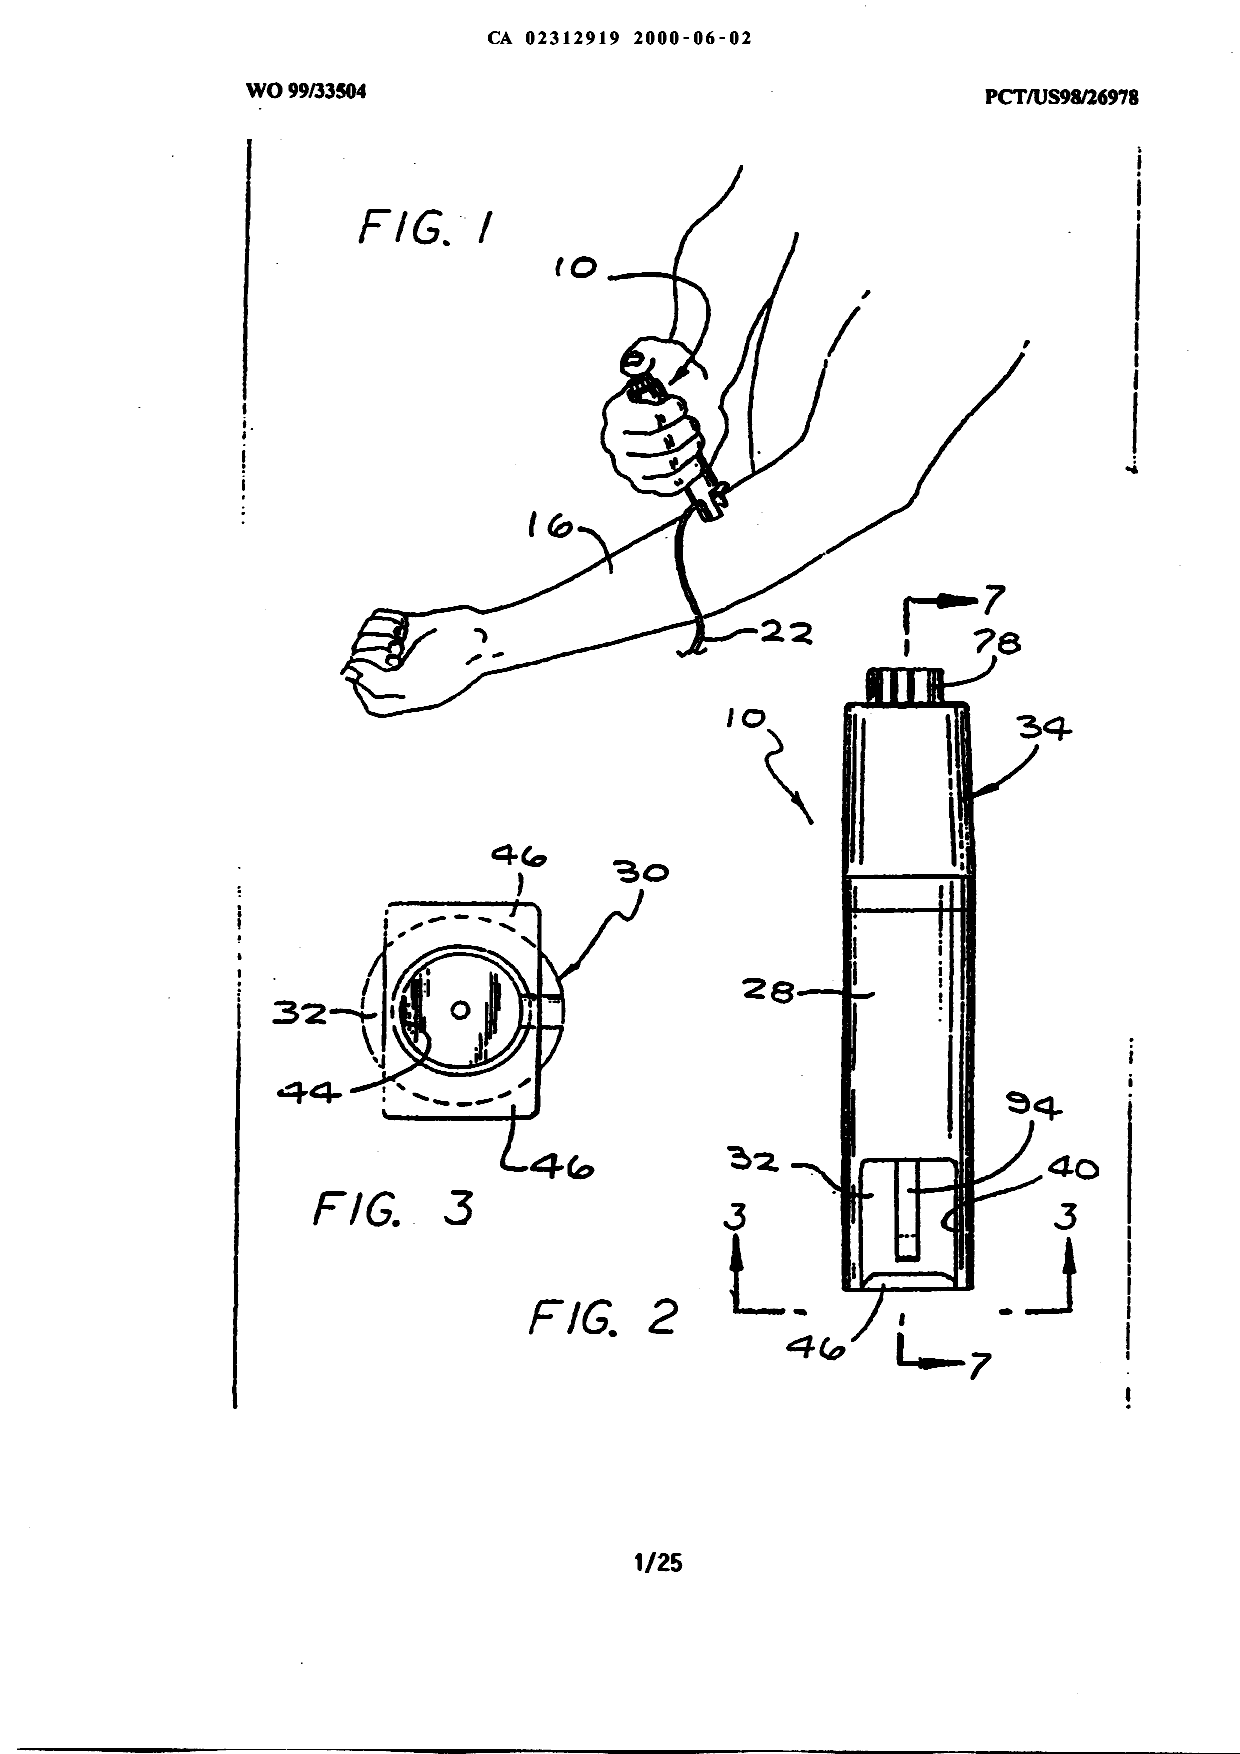 Canadian Patent Document 2312919. Drawings 20000602. Image 1 of 25